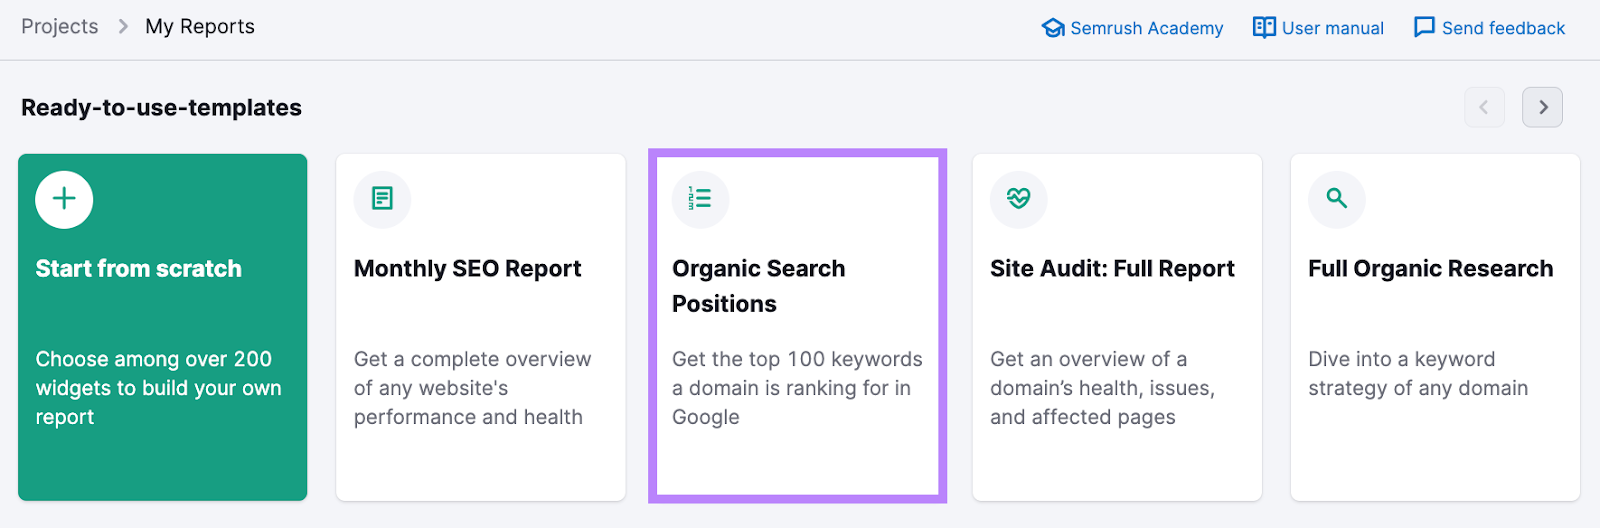 “Organic Search Positions” template highlighted in “My Reports”